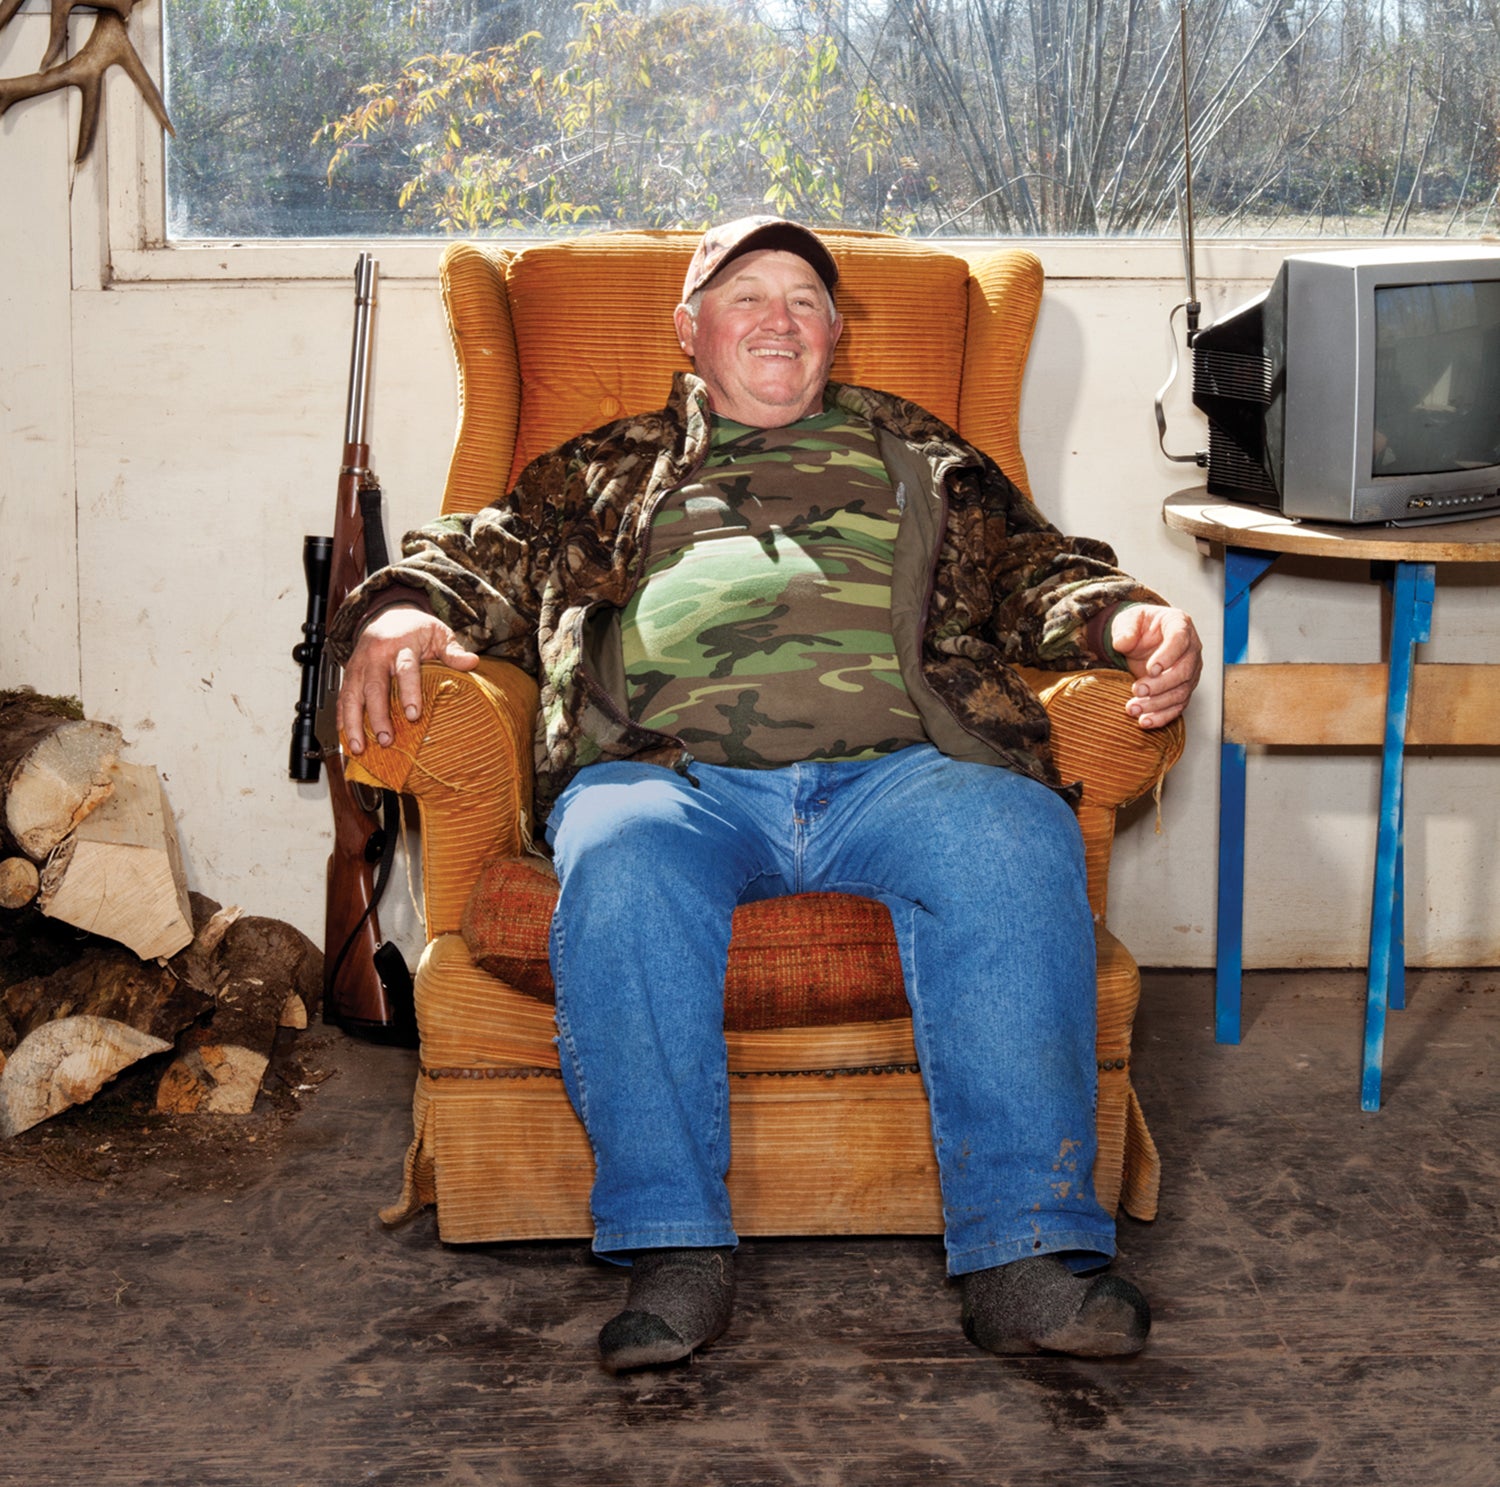 man wearing camo smiles and sits in worn chair under large window